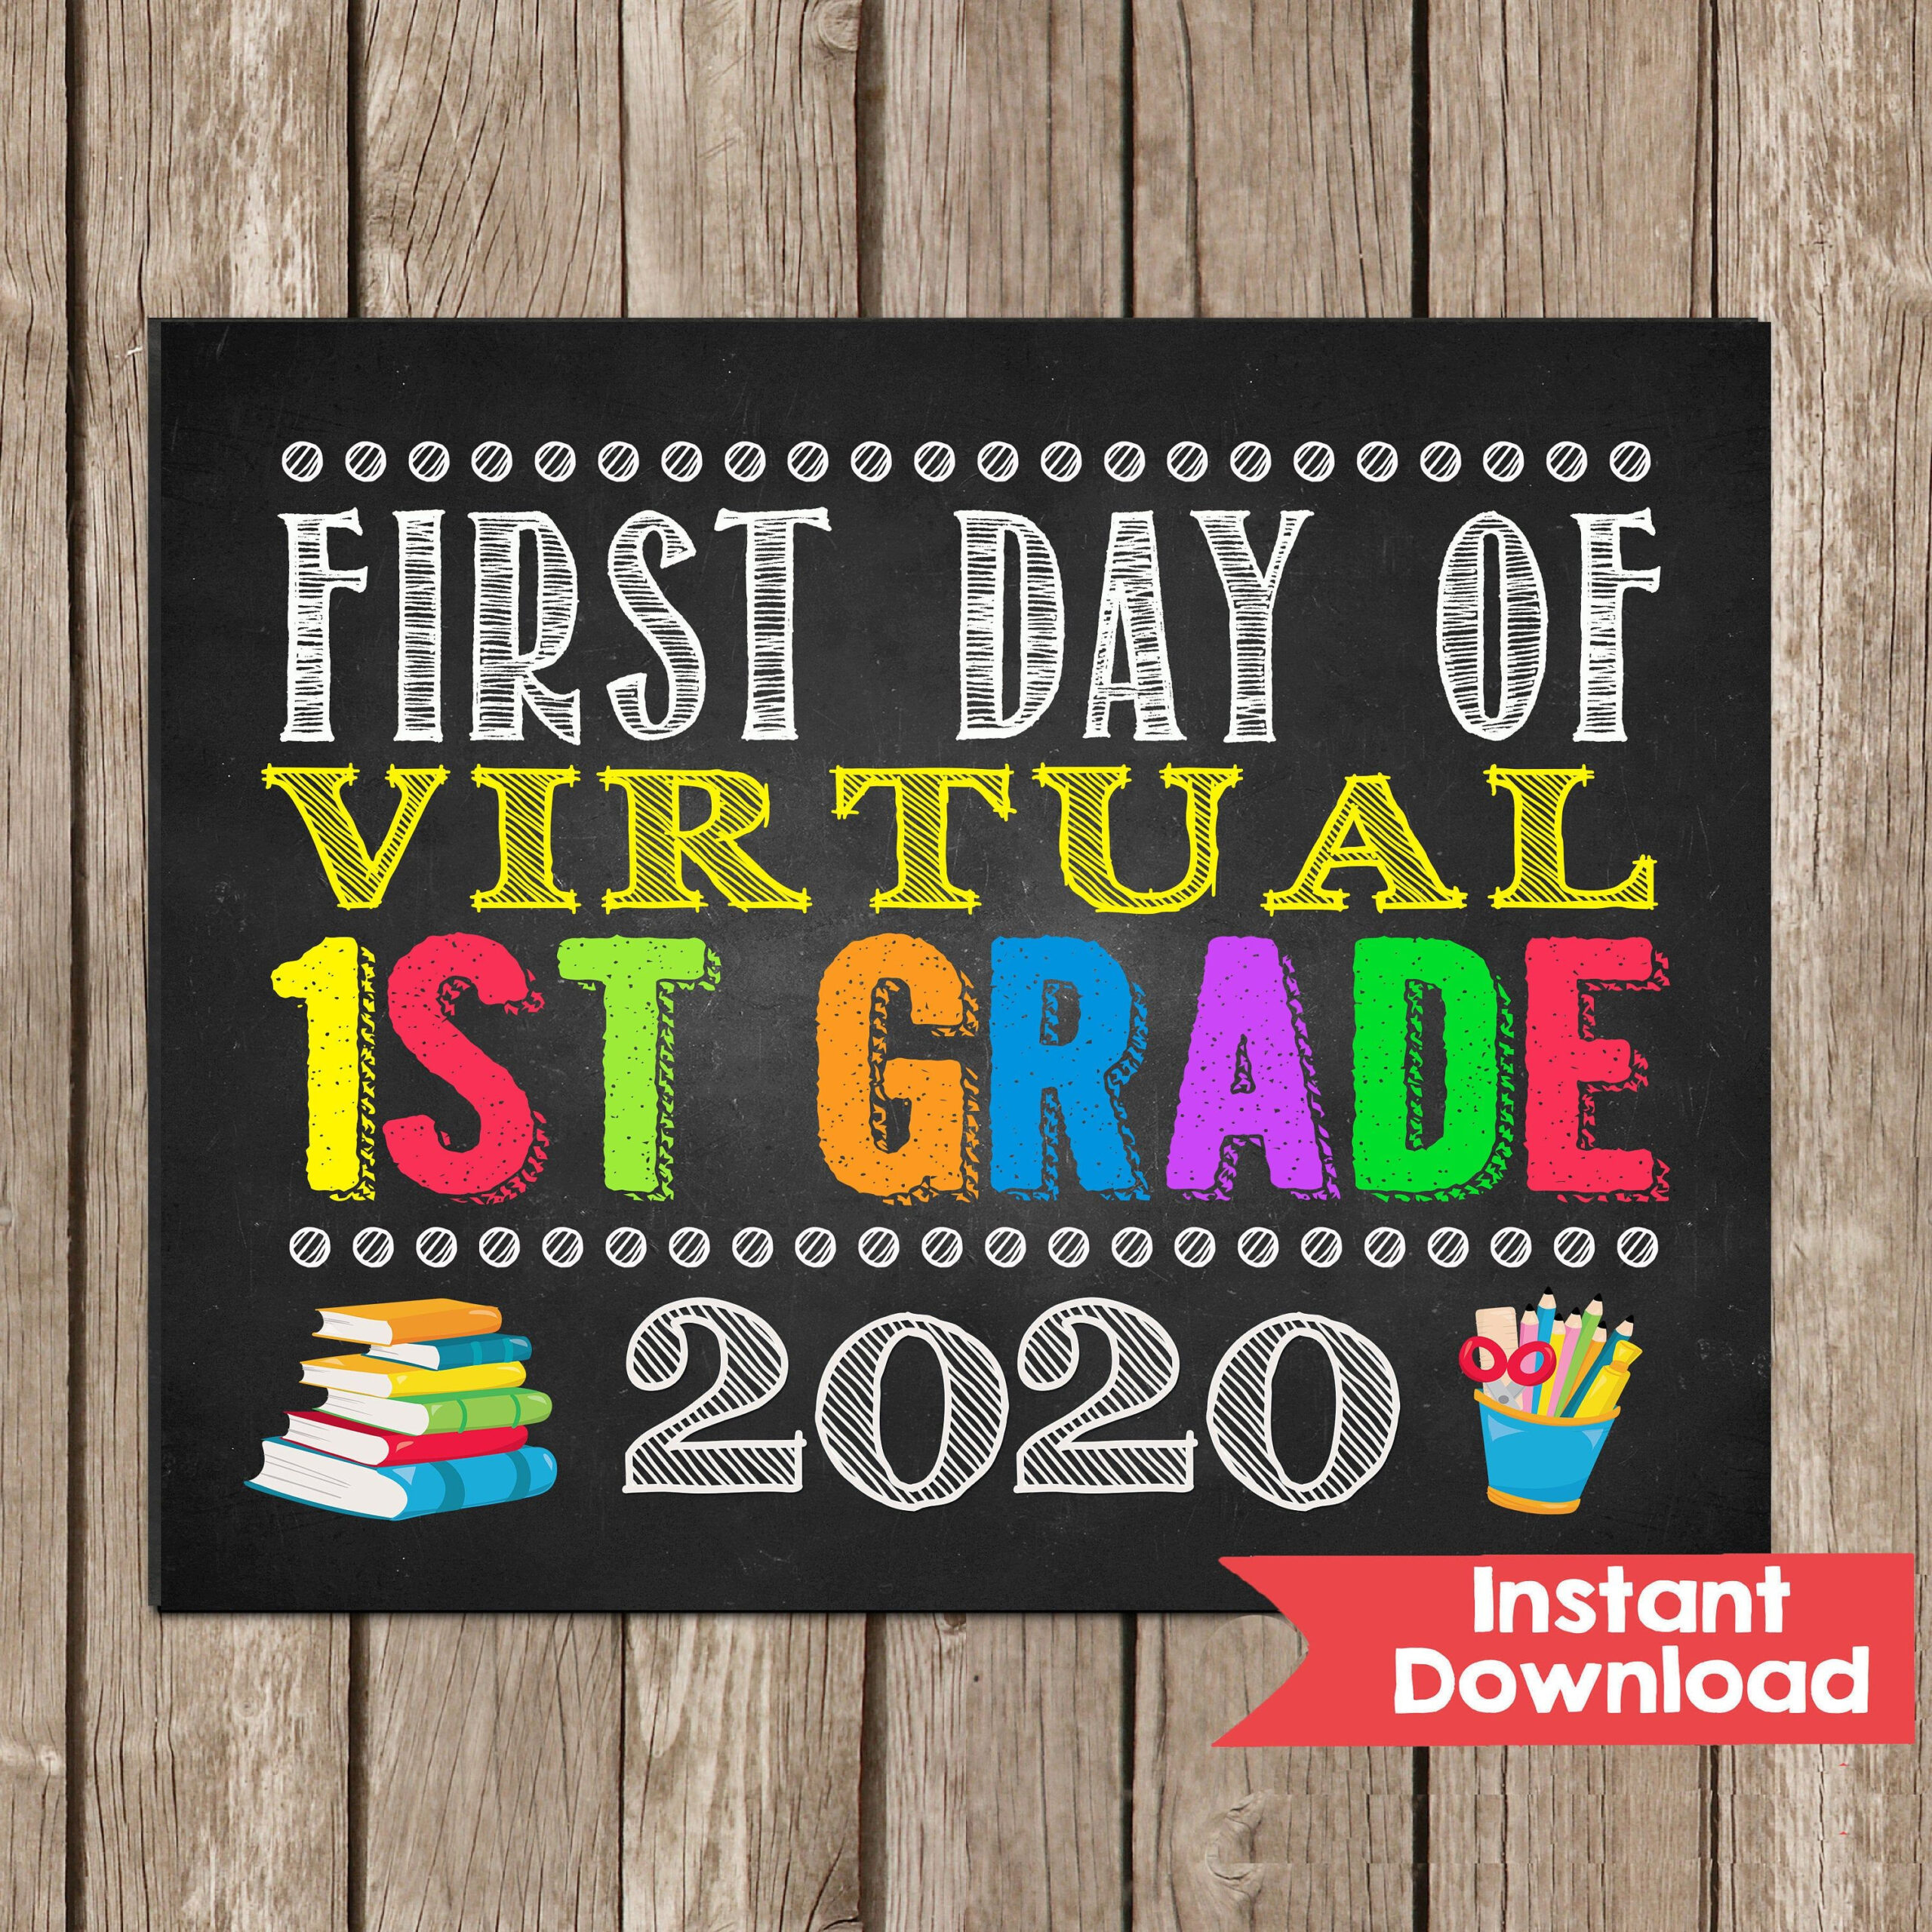 1st Day Of Virtual School Sign Free Printable